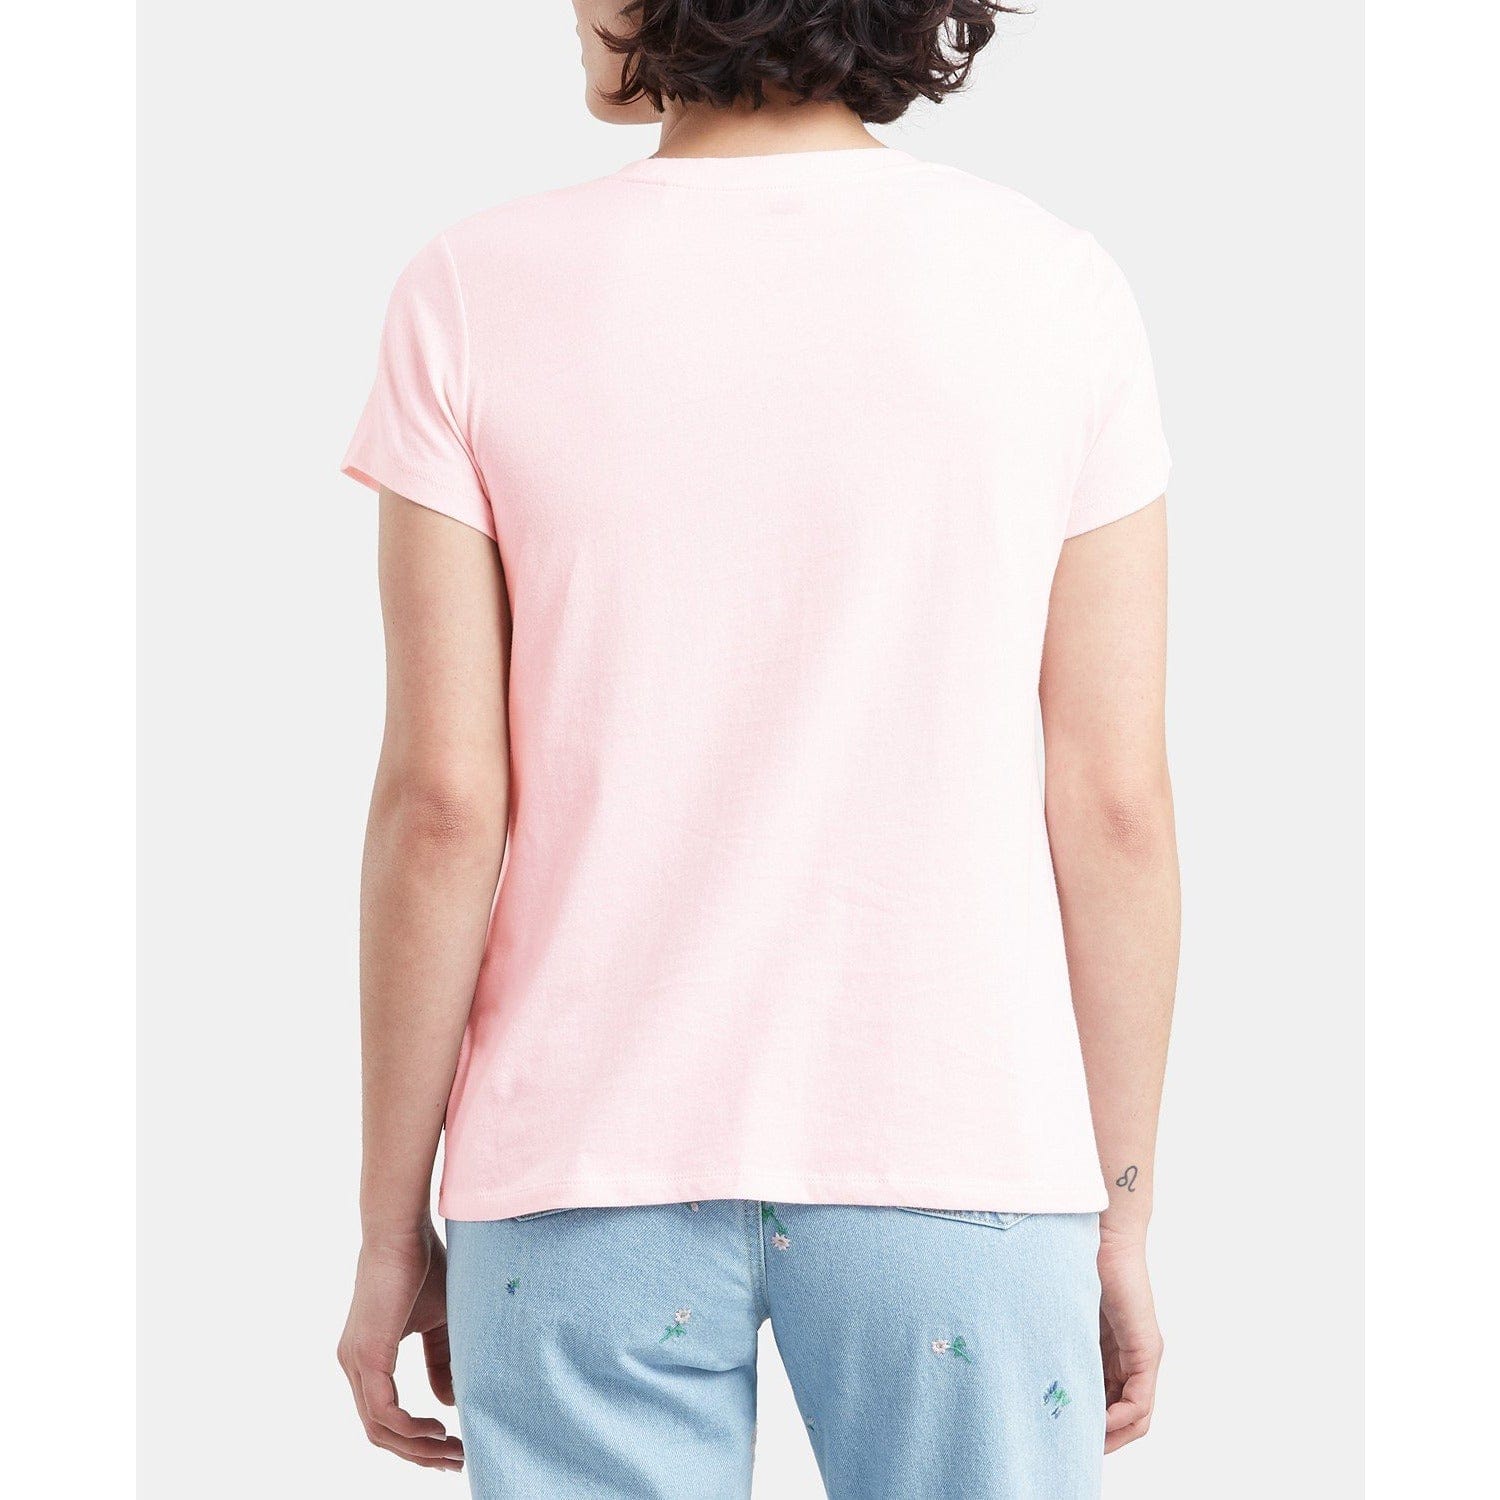 Levi's Perfect Graphic T-Shirt - The Pink Pigs, A Compassionate Boutique